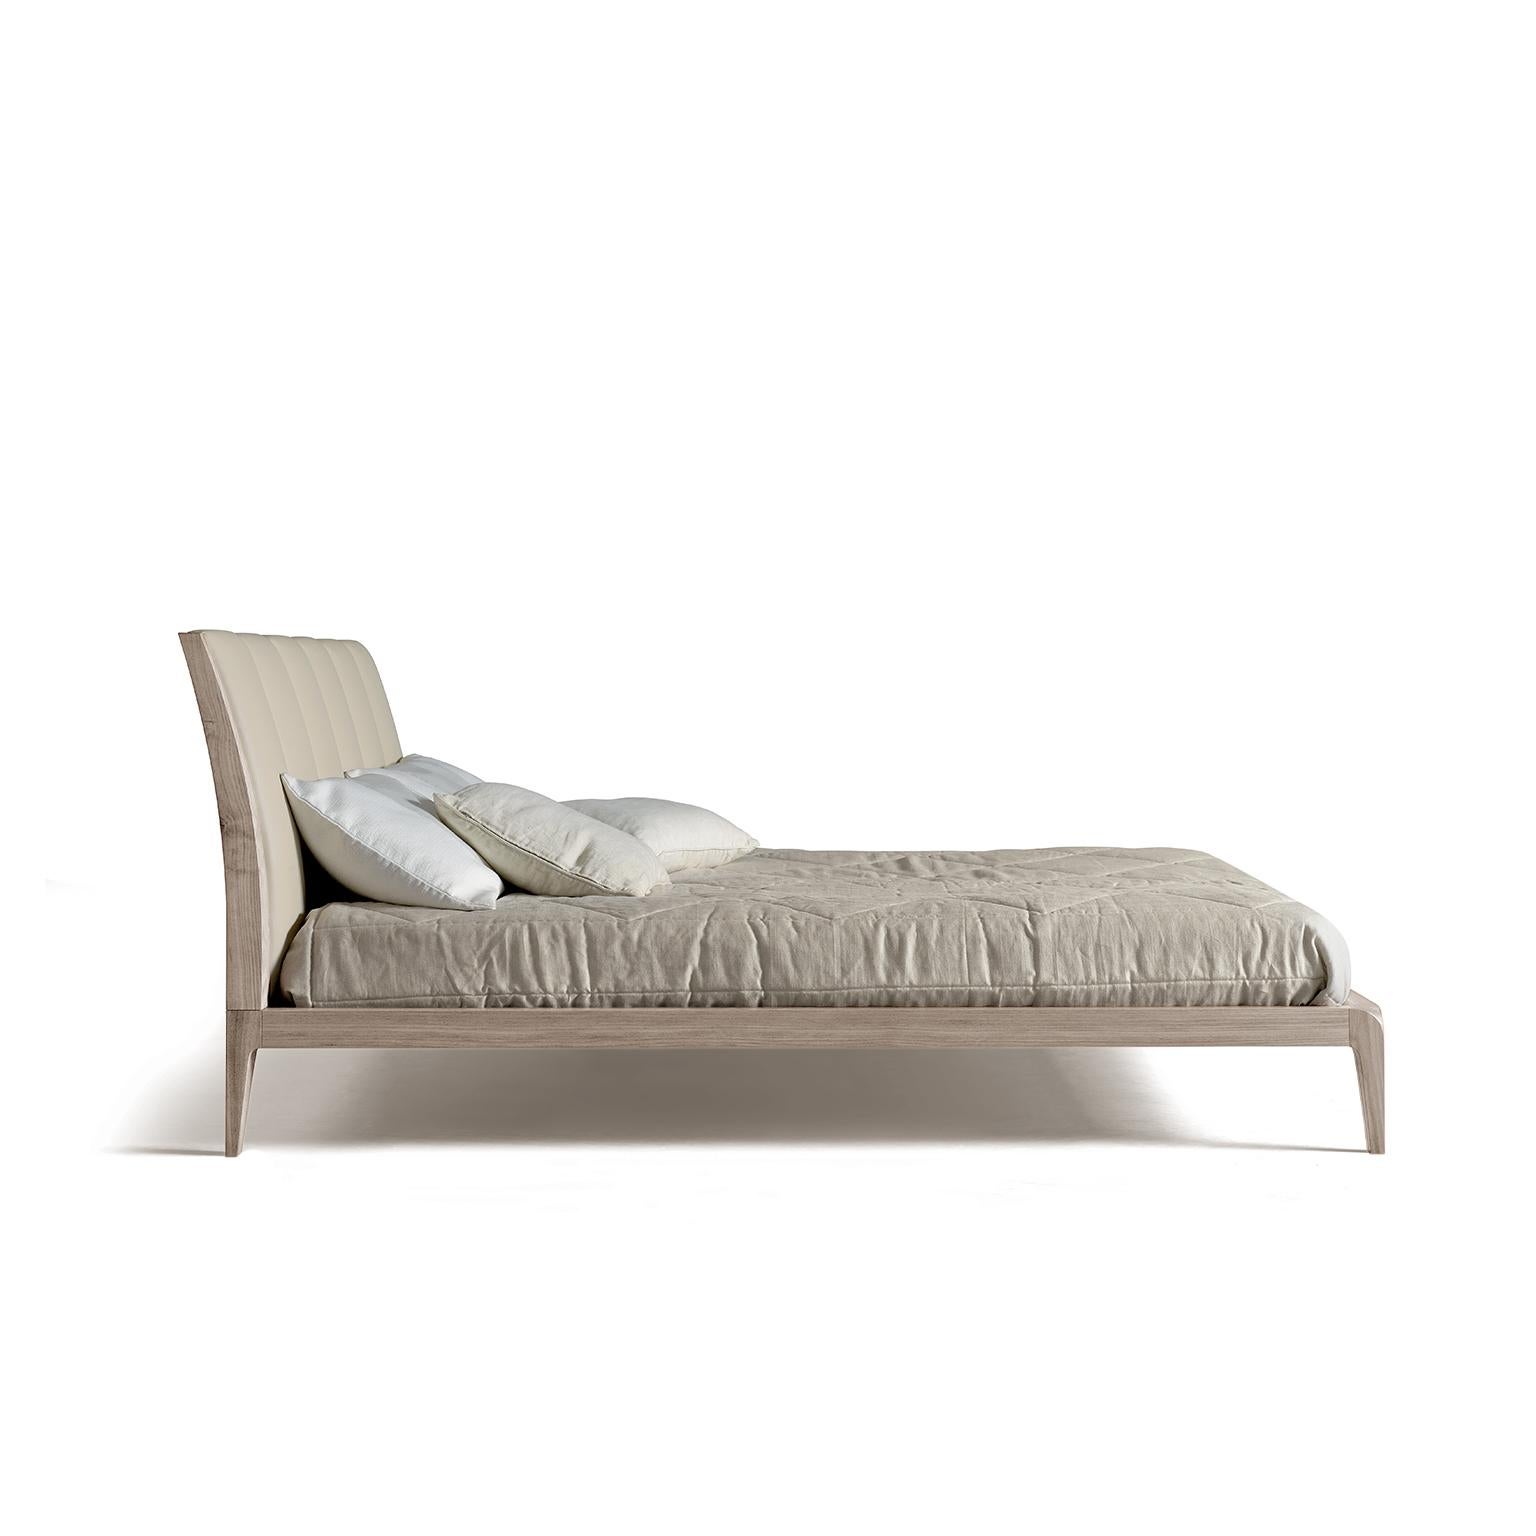 The well-proportioned bed features an upholstered headboard embellished with vertical stitching. Simple and elegant, the frame is constructed of solid, oil-finished walnut, a timeless piece that combines contemporary design with the high quality of